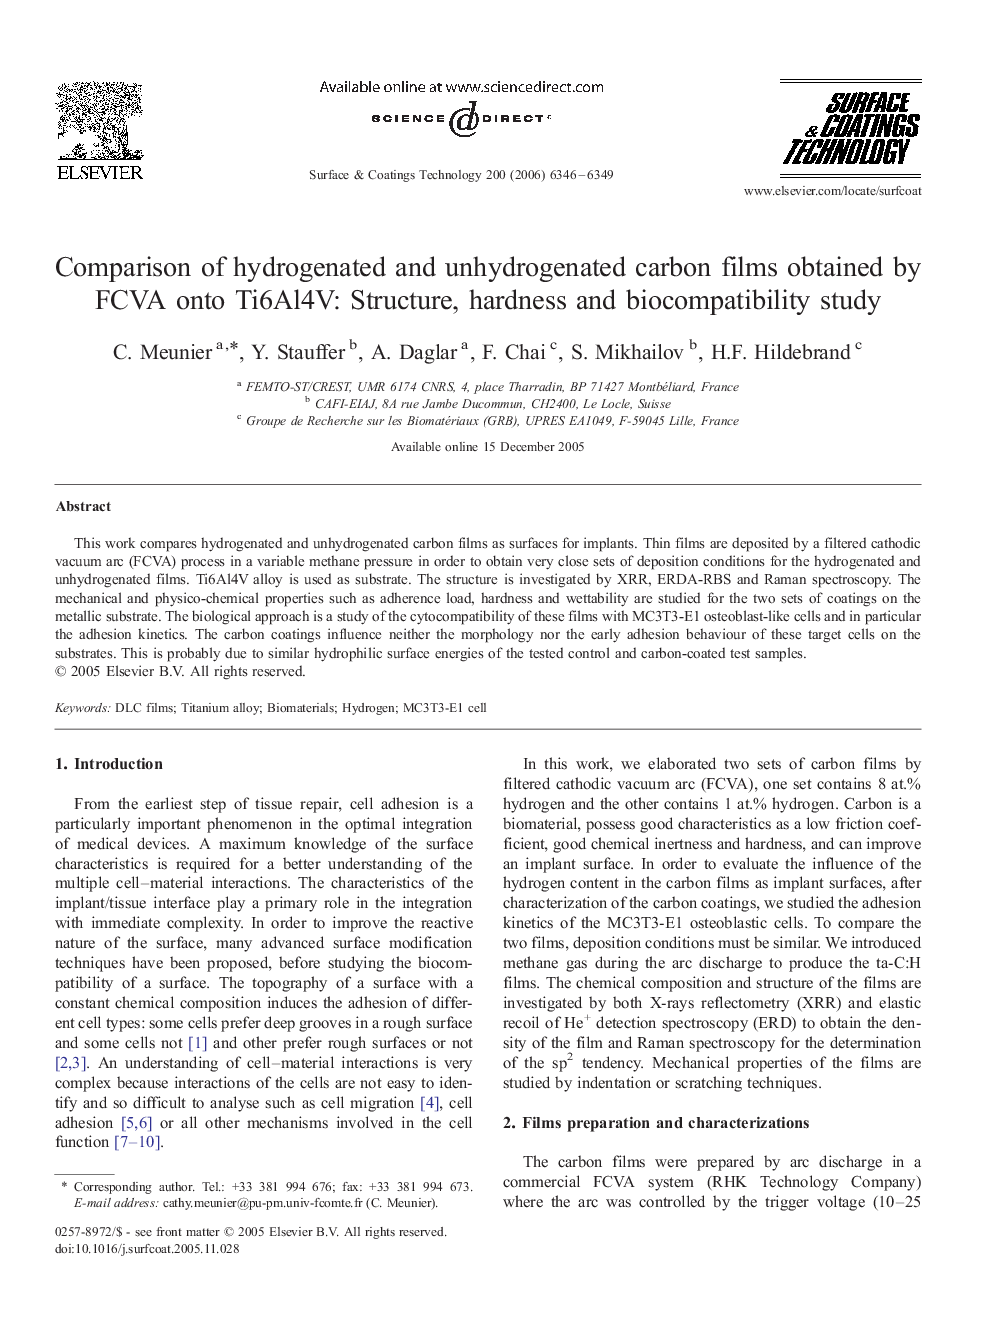 Comparison of hydrogenated and unhydrogenated carbon films obtained by FCVA onto Ti6Al4V: Structure, hardness and biocompatibility study